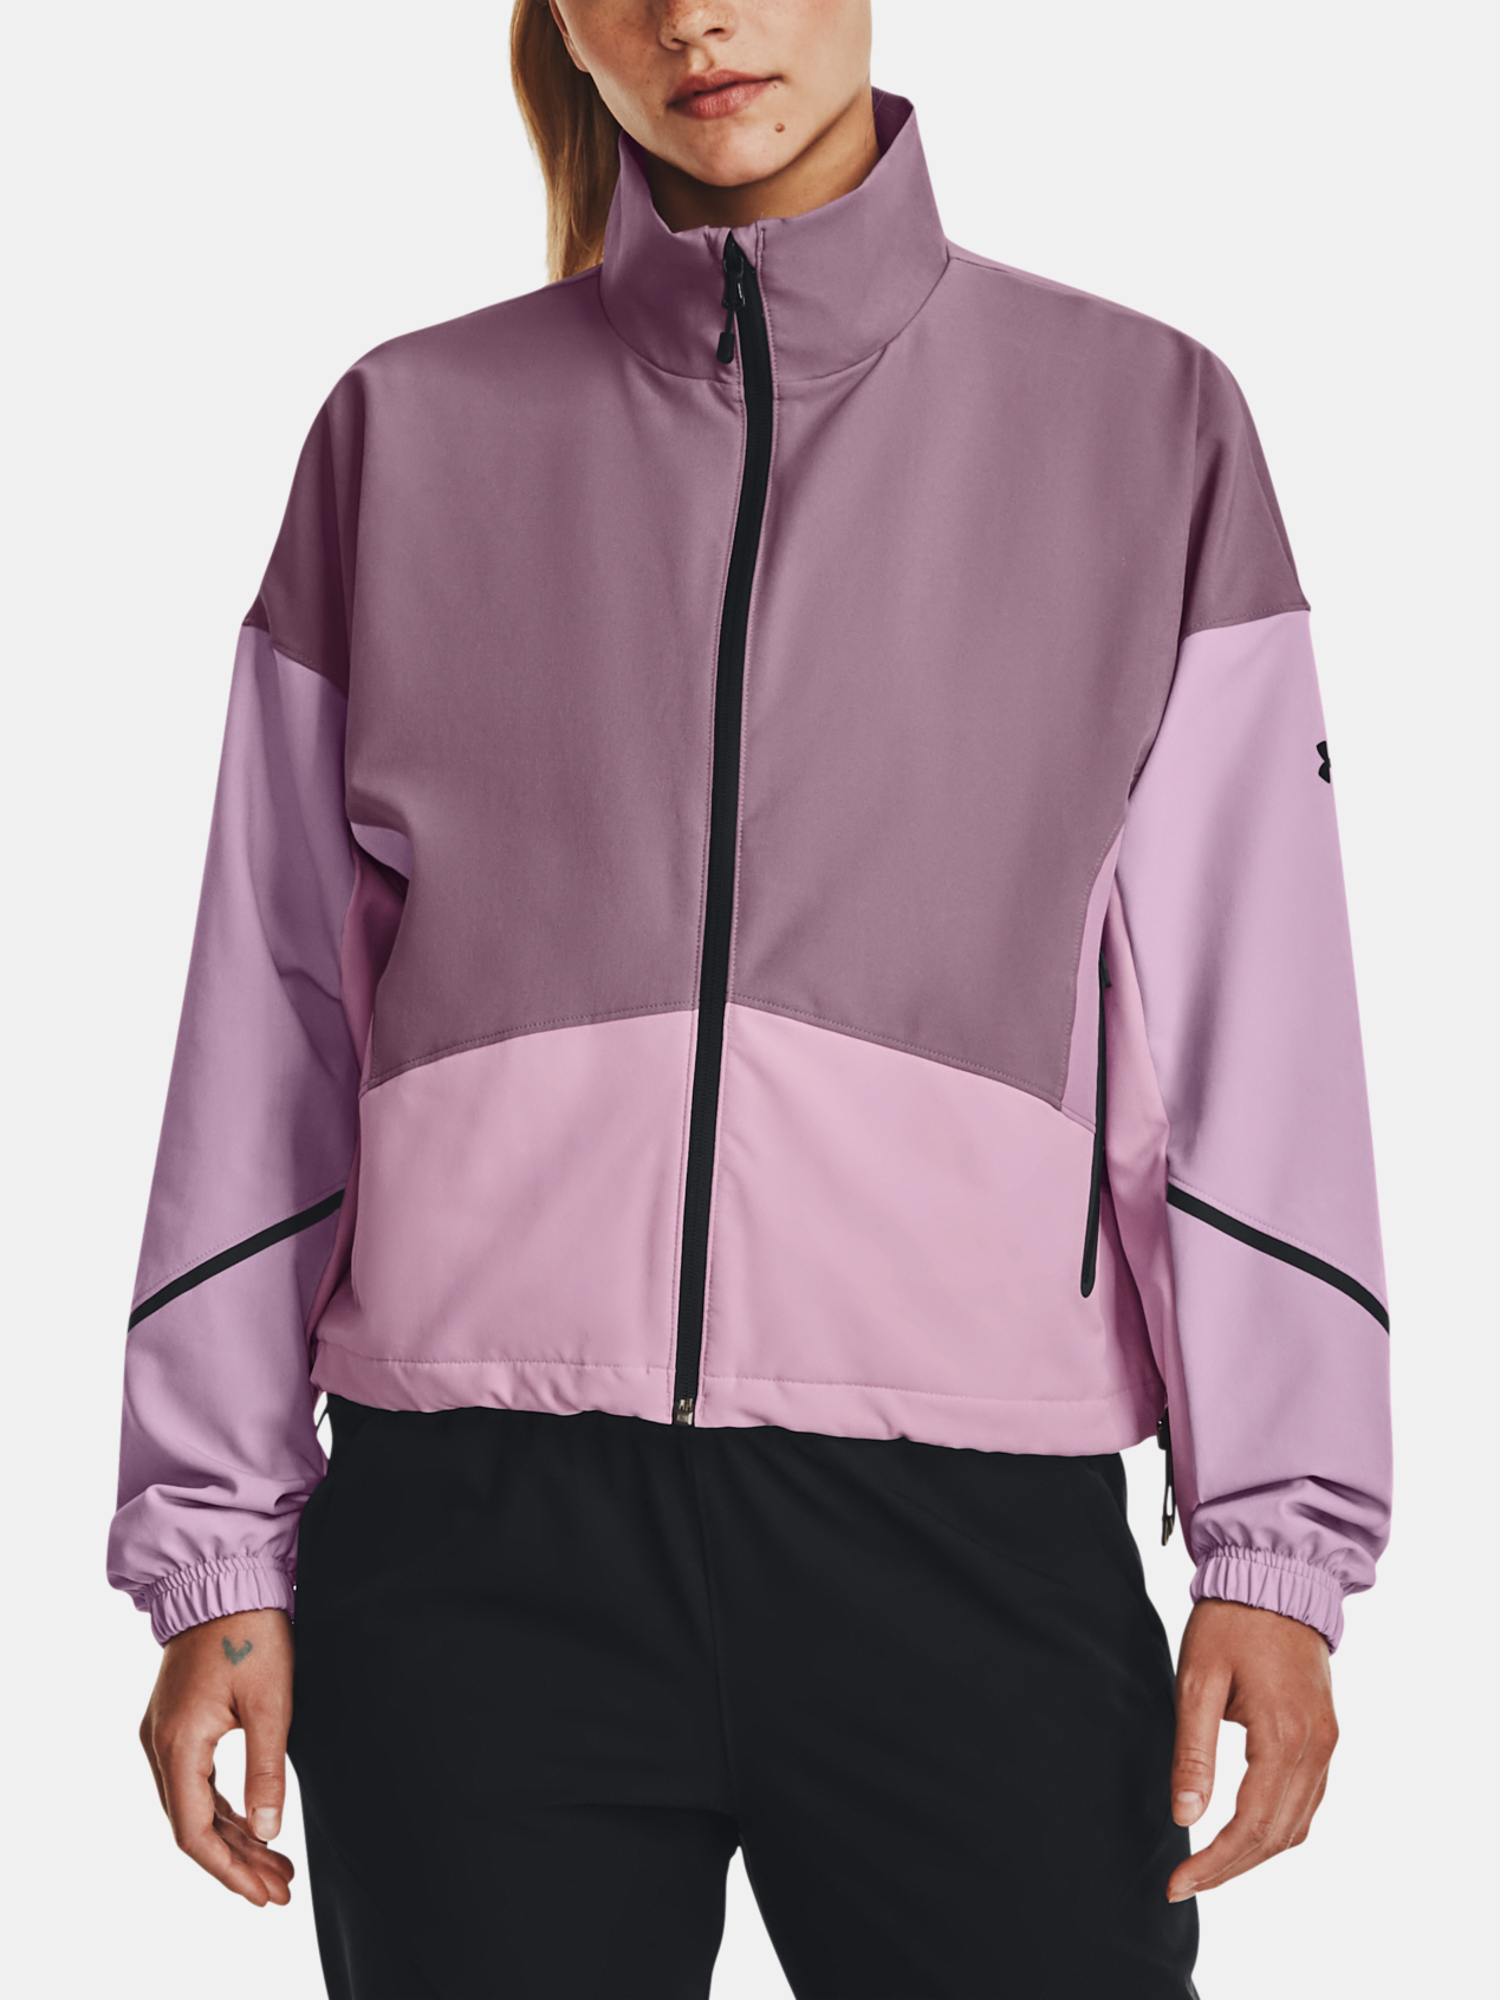 Under Armour Jacket Unstoppable Jacket-PPL - Women